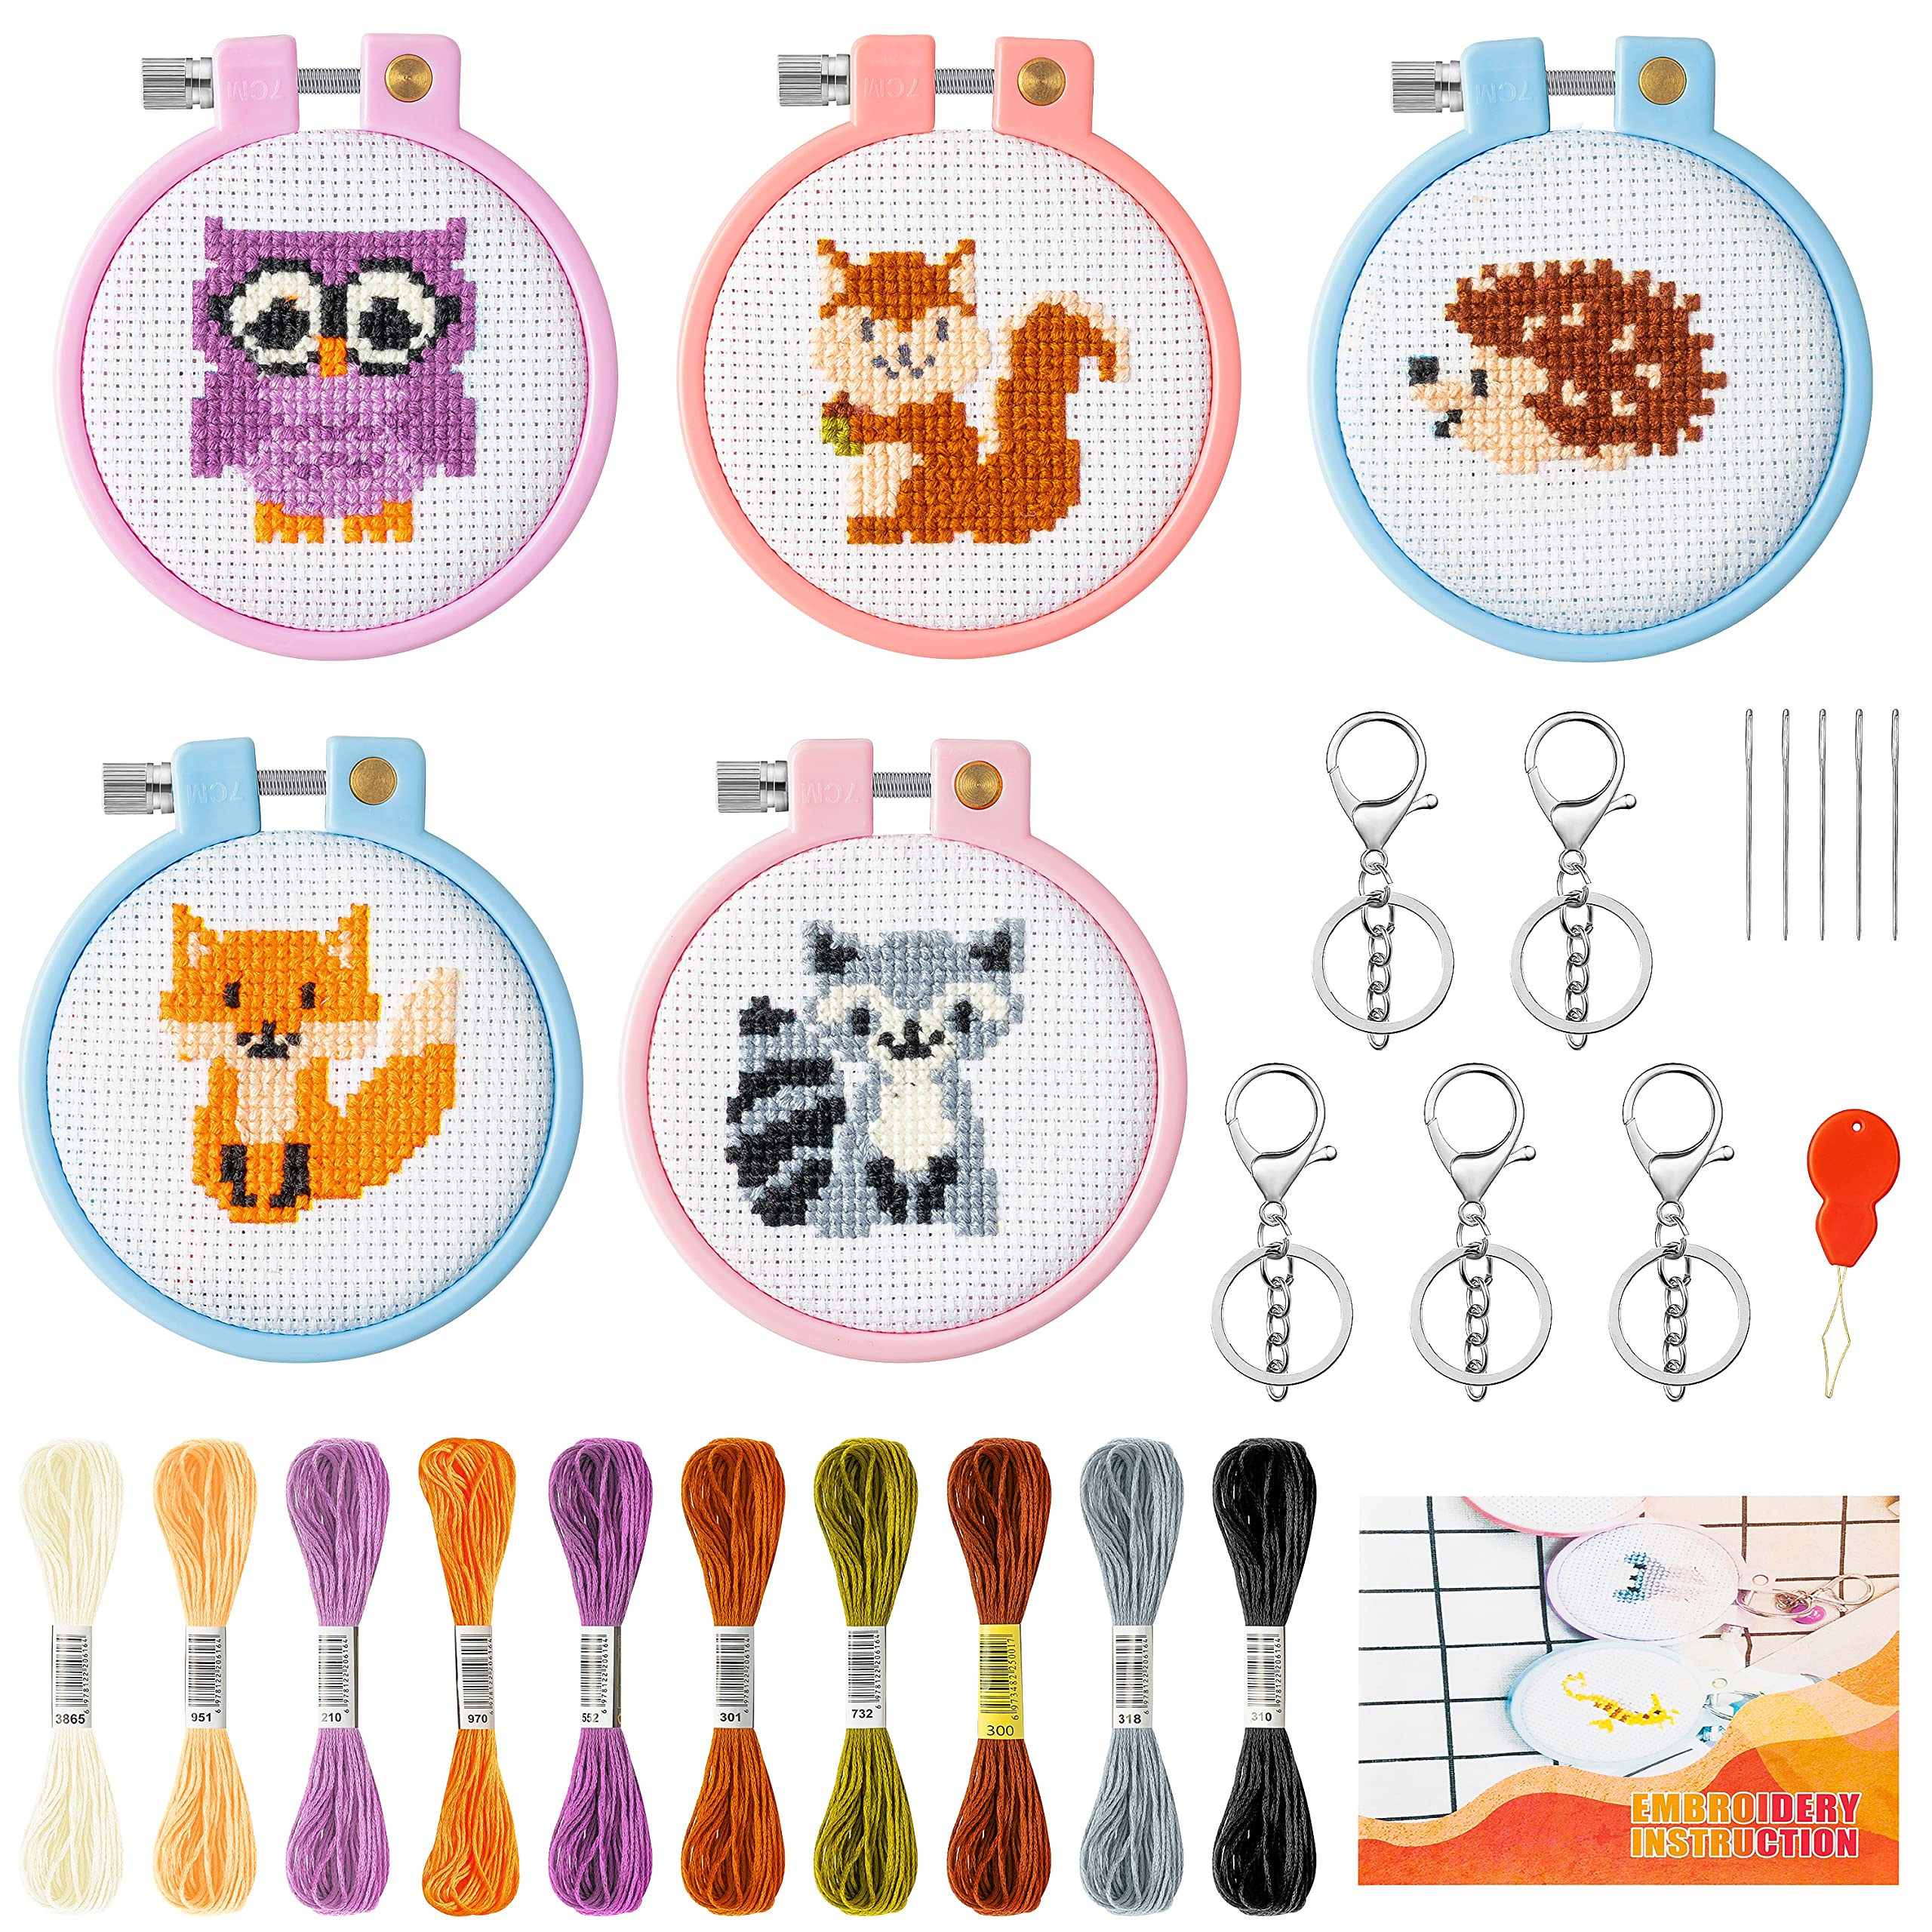 Woodland Animal Party Favors 24pcs Cute Animal Keychains for Kids